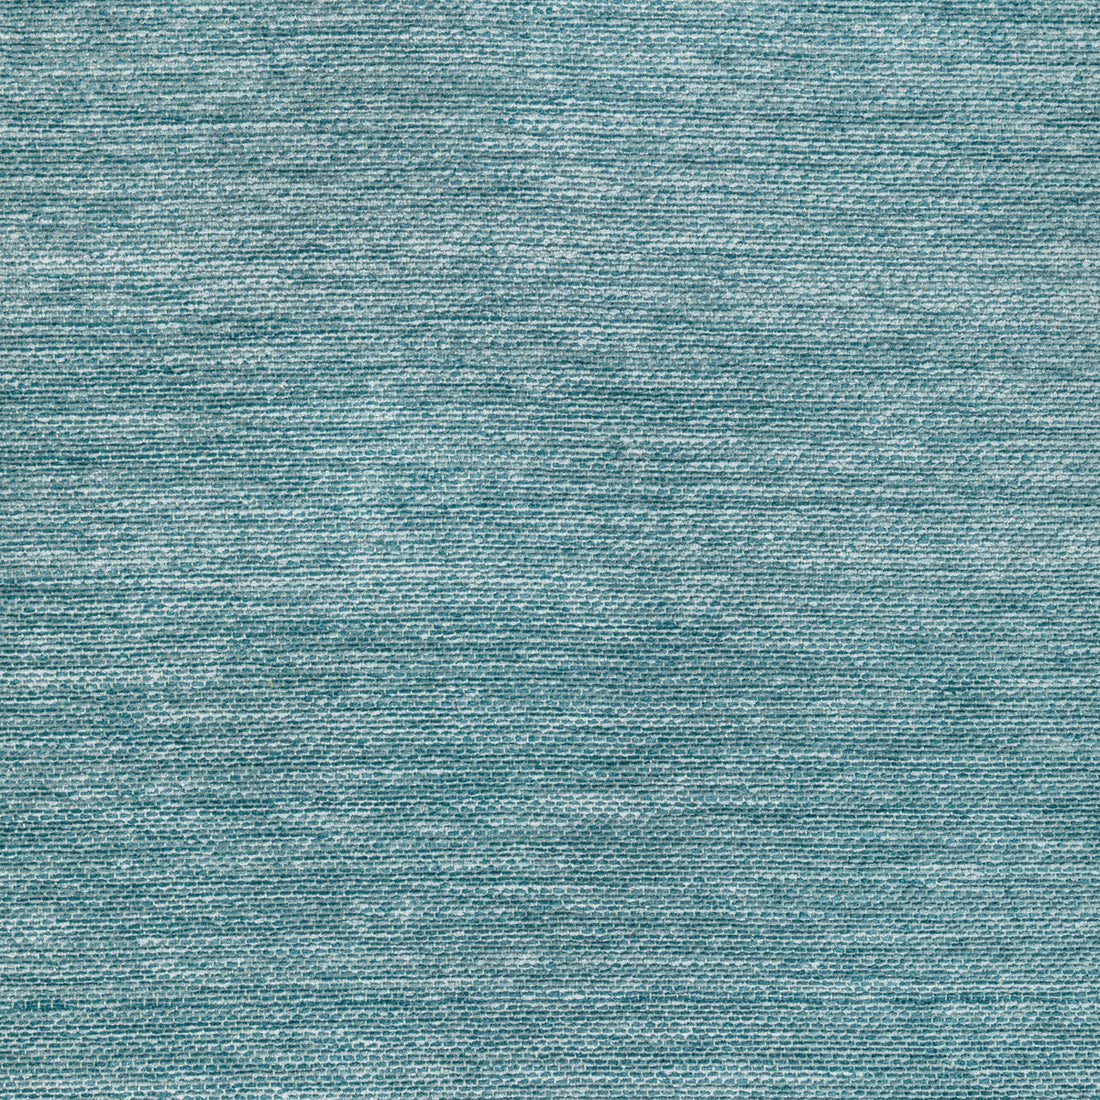 Cognin Texture fabric in aqua color - pattern 8022126.13.0 - by Brunschwig &amp; Fils in the Chambery Textures III collection